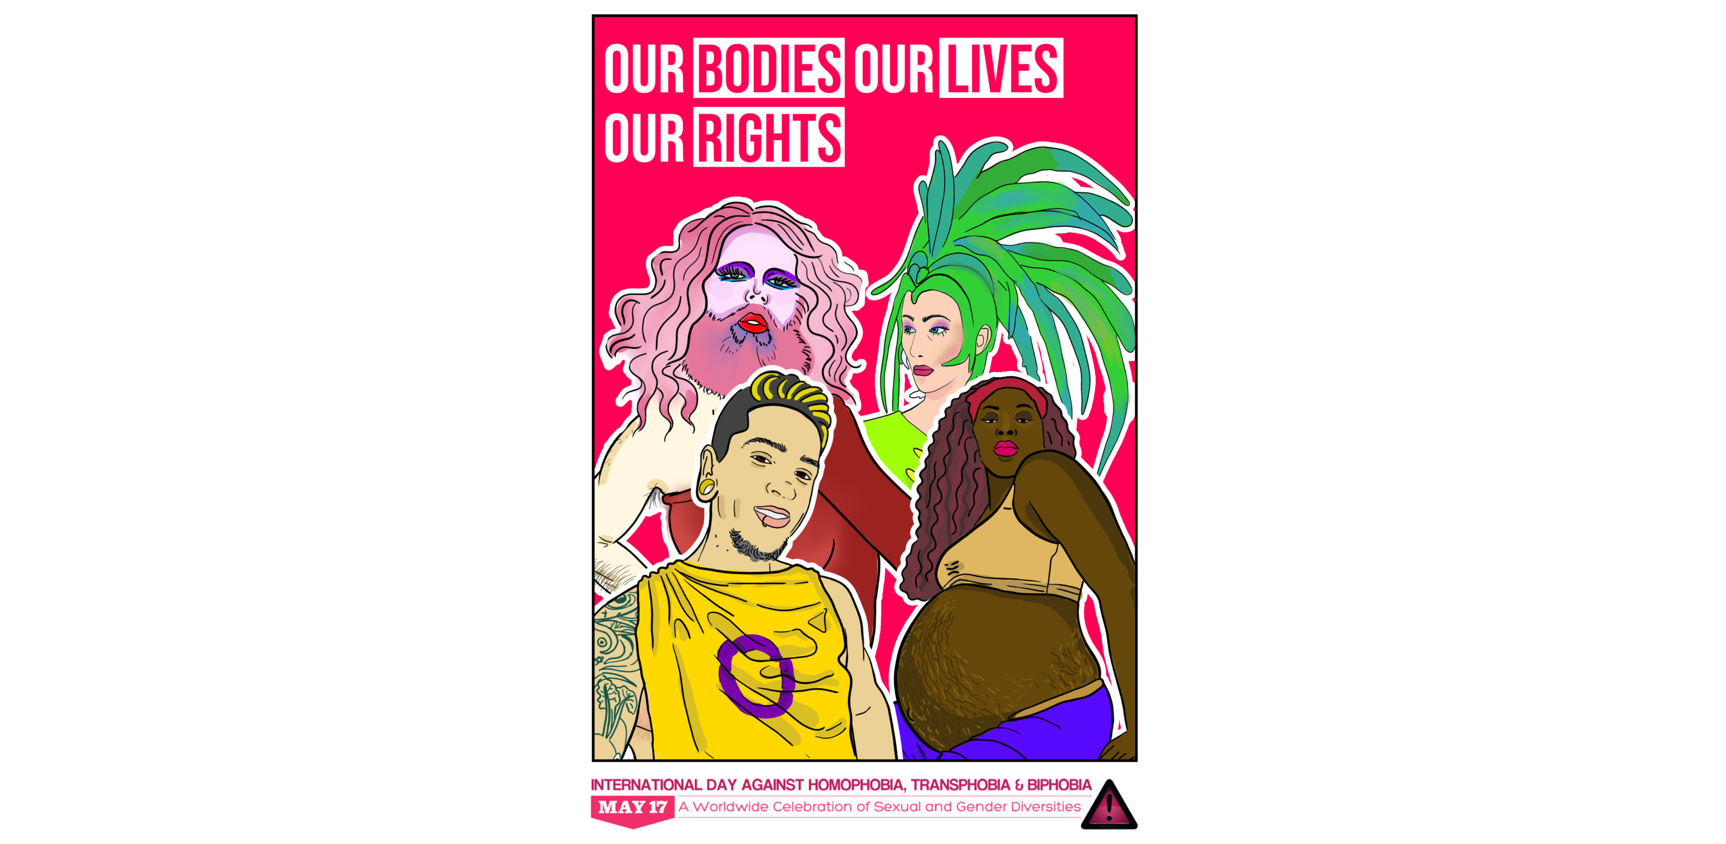 Our Bodies, Our Lives, Our Rights International Day Against Homophobia, Transphobia and Biphobia , May 17: a worldwide celebration of gender and sexual diversities